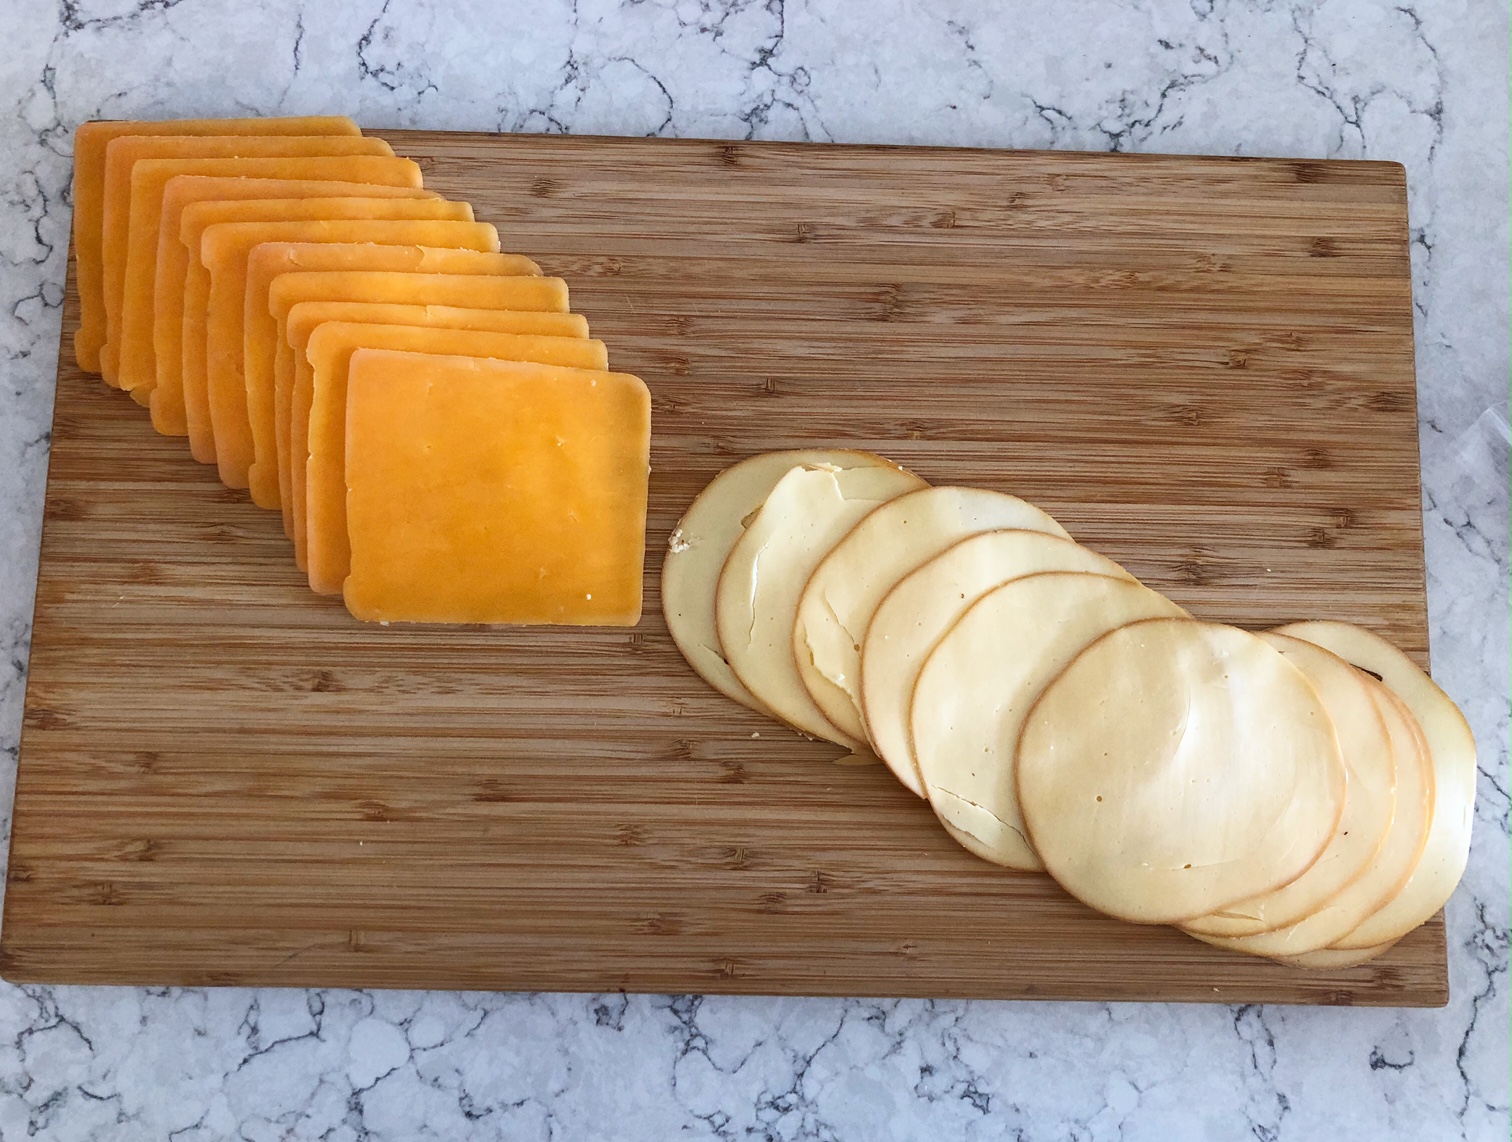 On a wooden cutting board, there are square slices of cheddar arranged in a diagonal meeting in the middle with circular slices of gouda cheese. Photo by Alyssa Buckley.